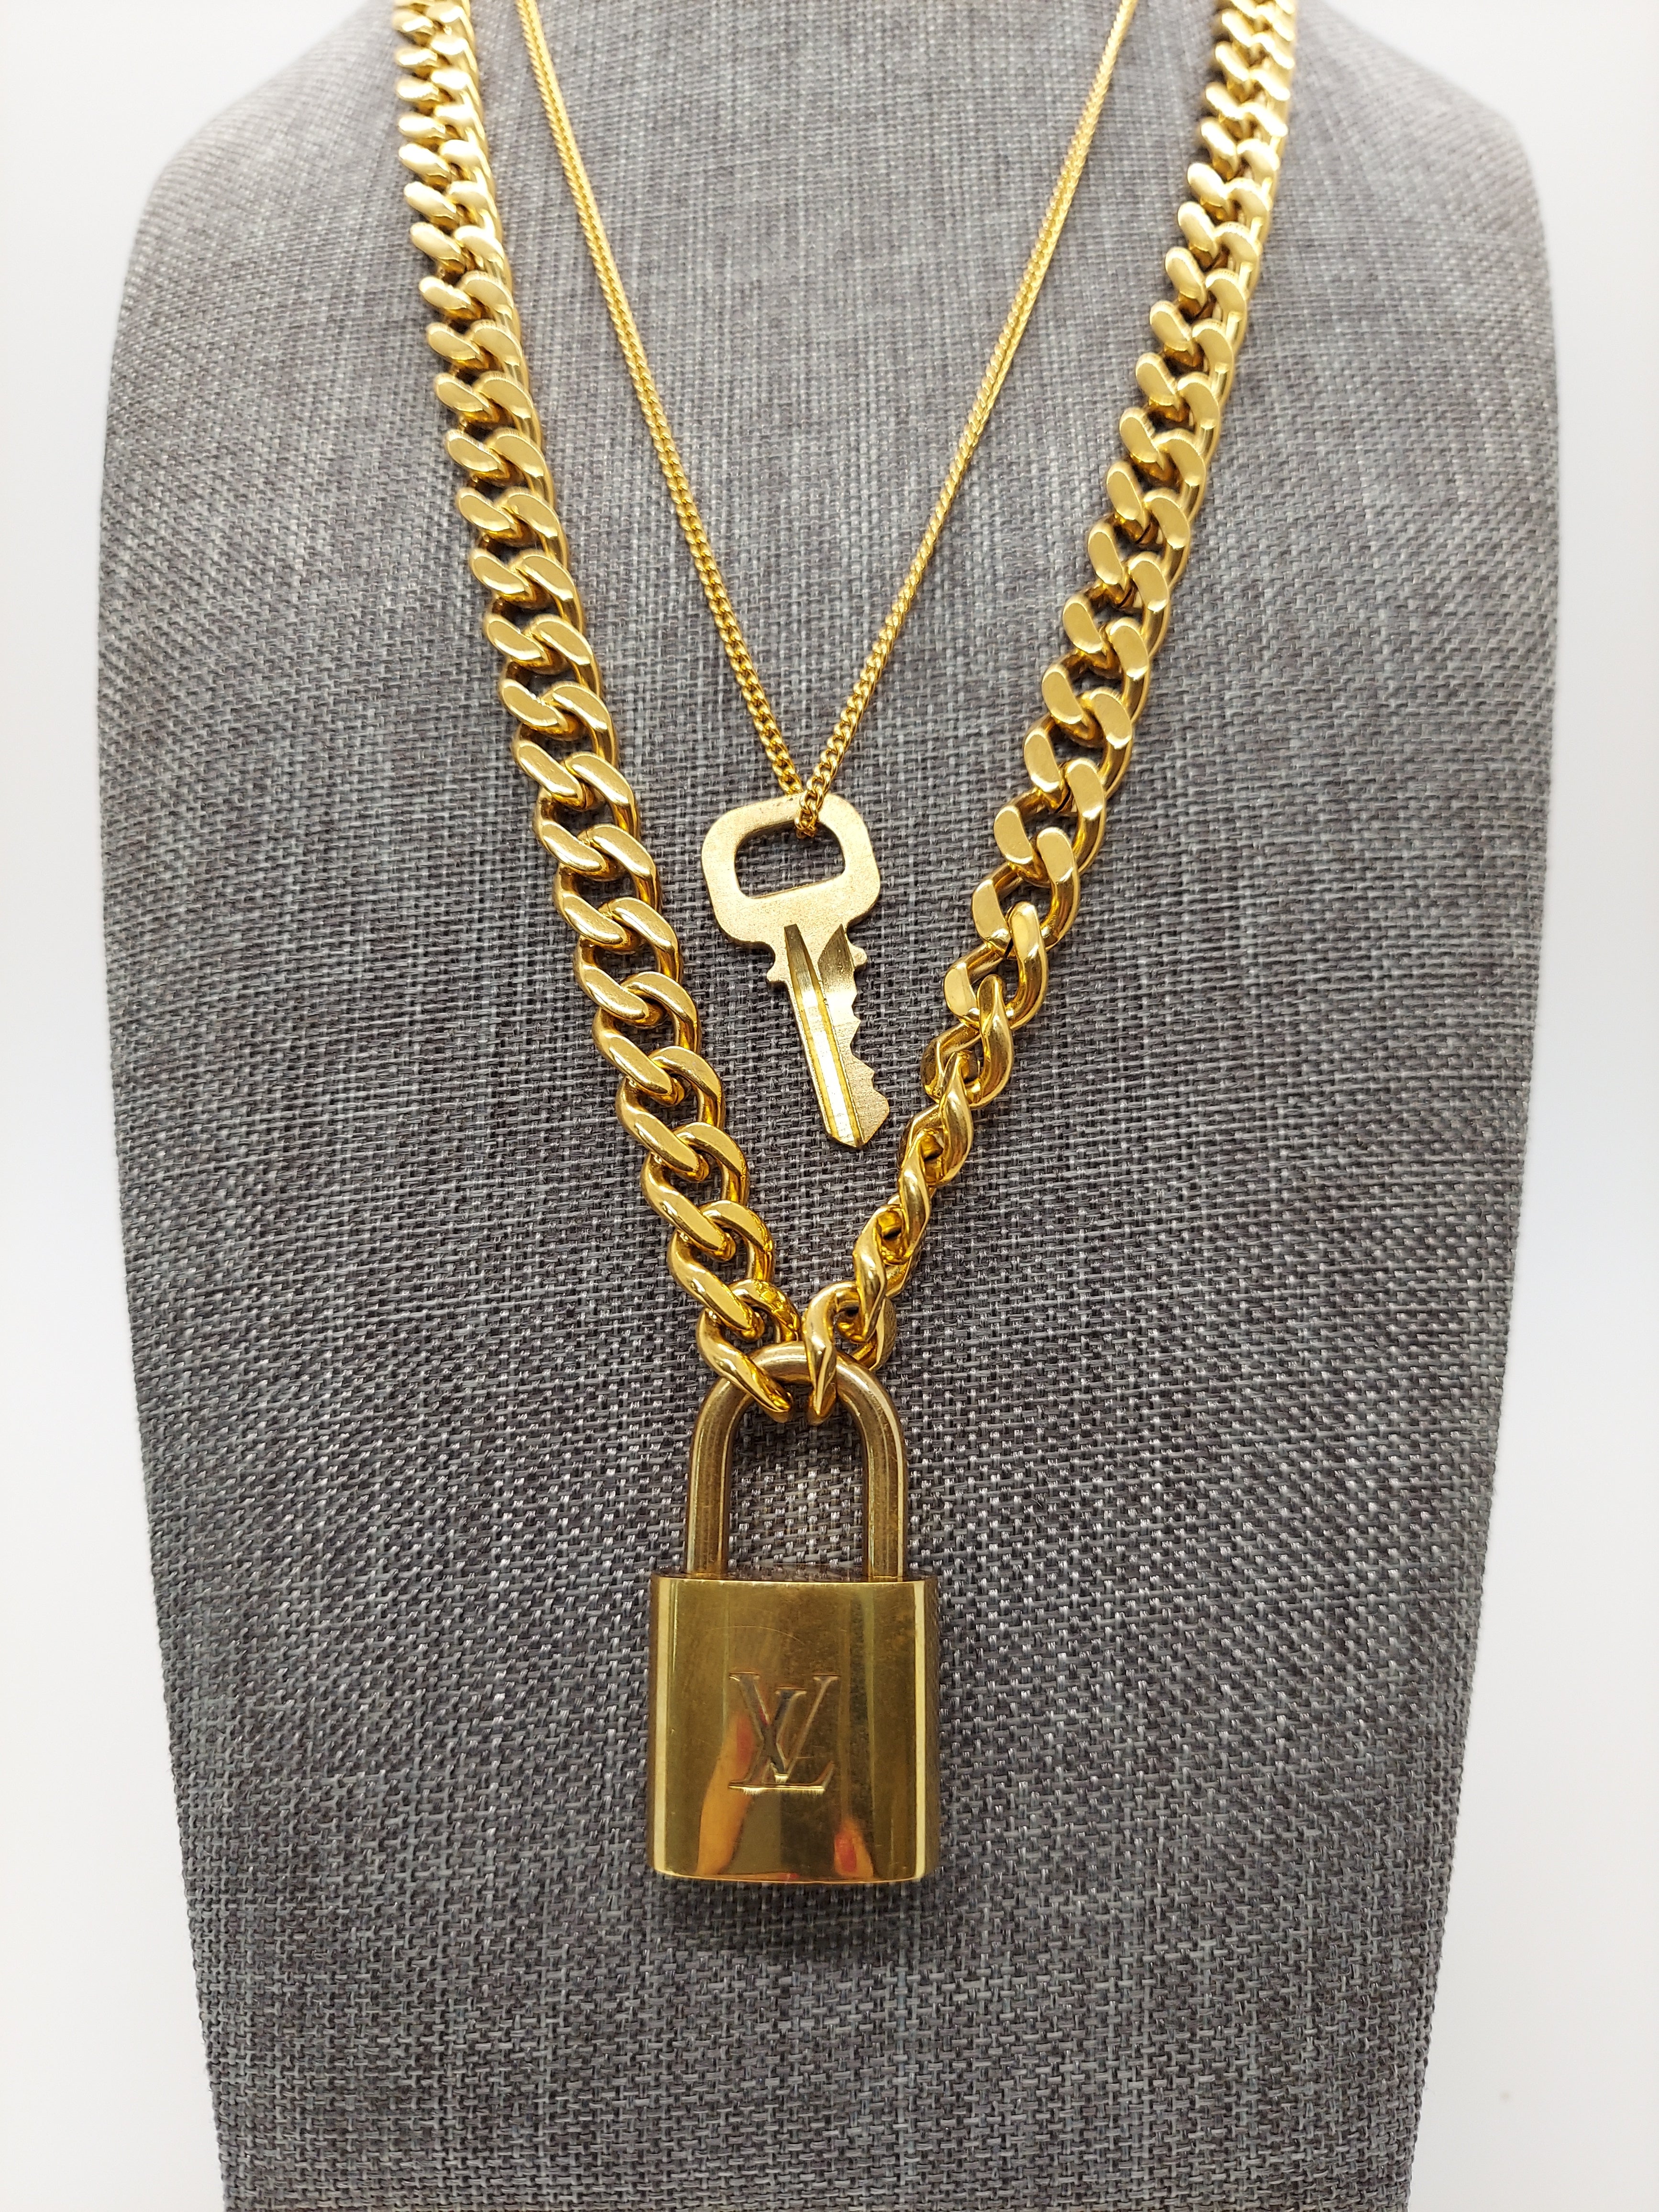 Louis Vuitton Necklace Padlock with single chain | eBay